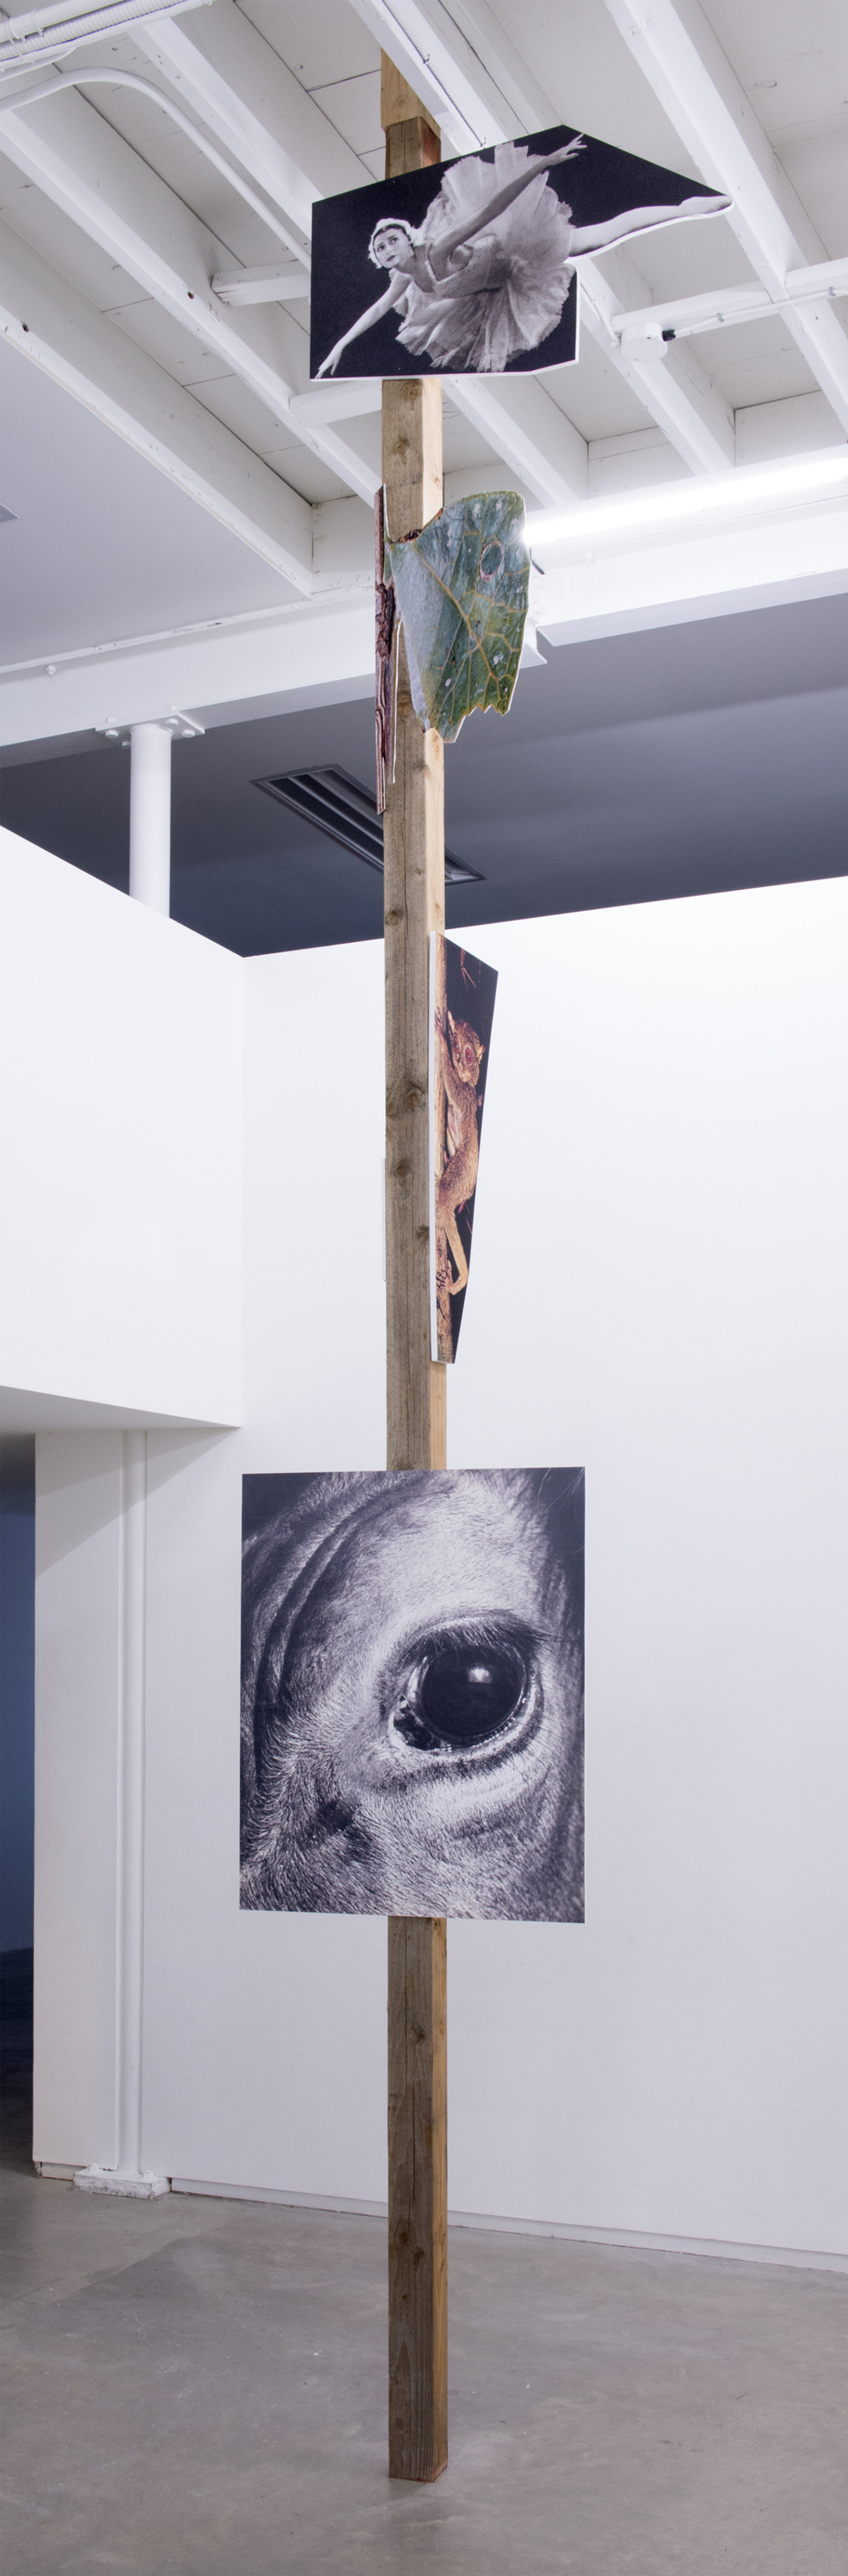 Geoffrey Farmer, In the dark pool the grass grows. In the grass there is night. Hold tight, and climb the tree, eating leaves then leap!, 2014, douglas fir pole, 6 photographs mounted on foamcore, 200 x 4 x 4 in. (508 x 9 x 9 cm)